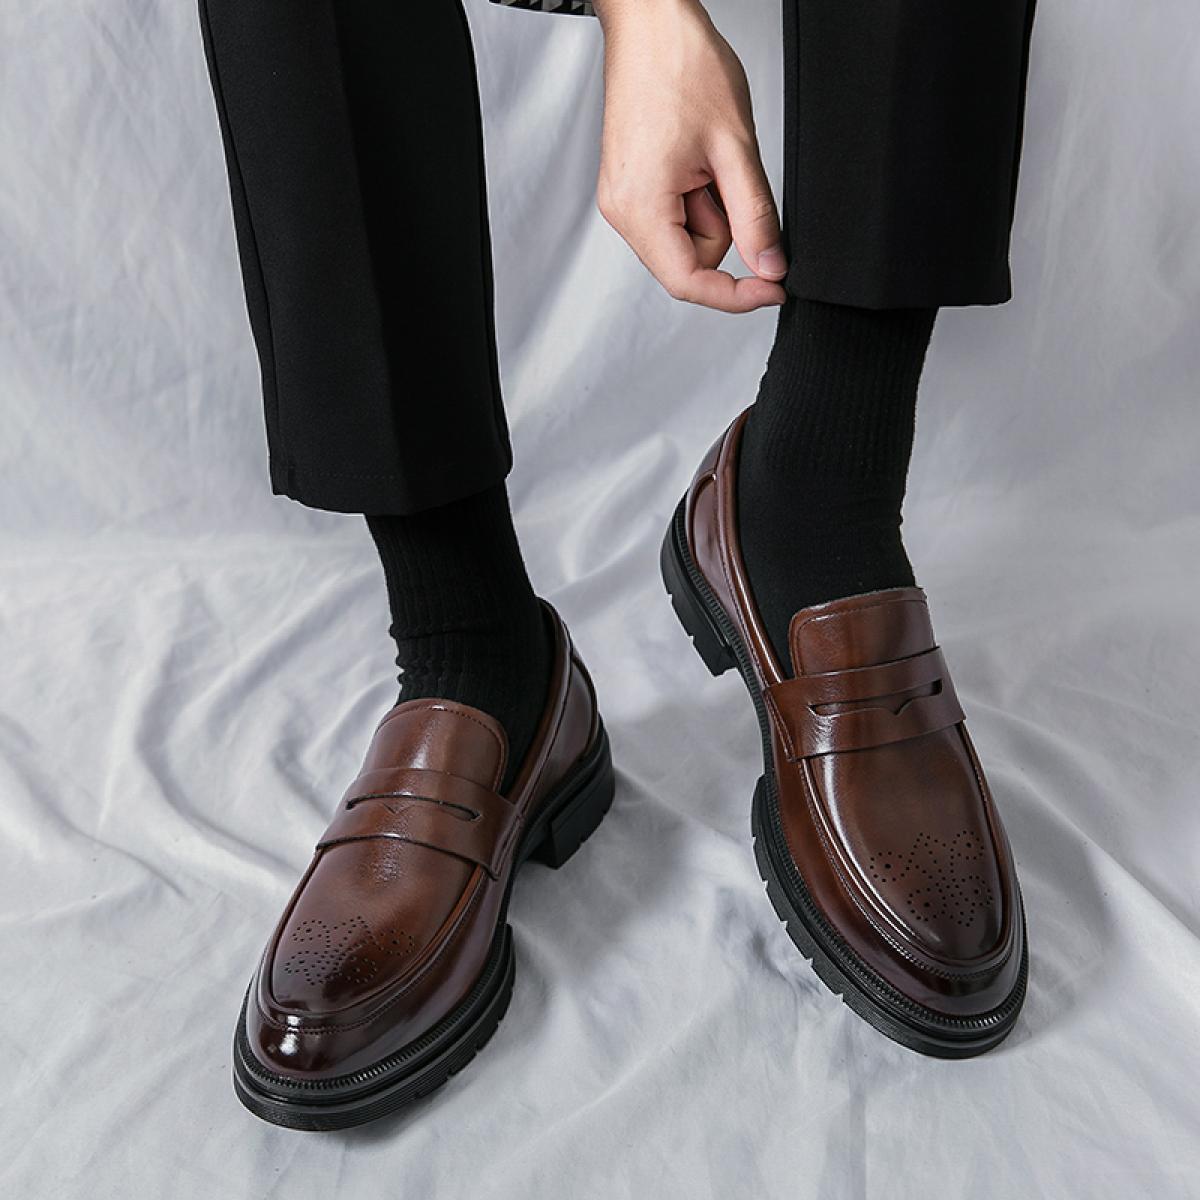 New Brown Loafers Shoes For Men Low Heel Round Toe Slip On Black Business Mens Formal Shoes Size 38 46 Free Shipping Men